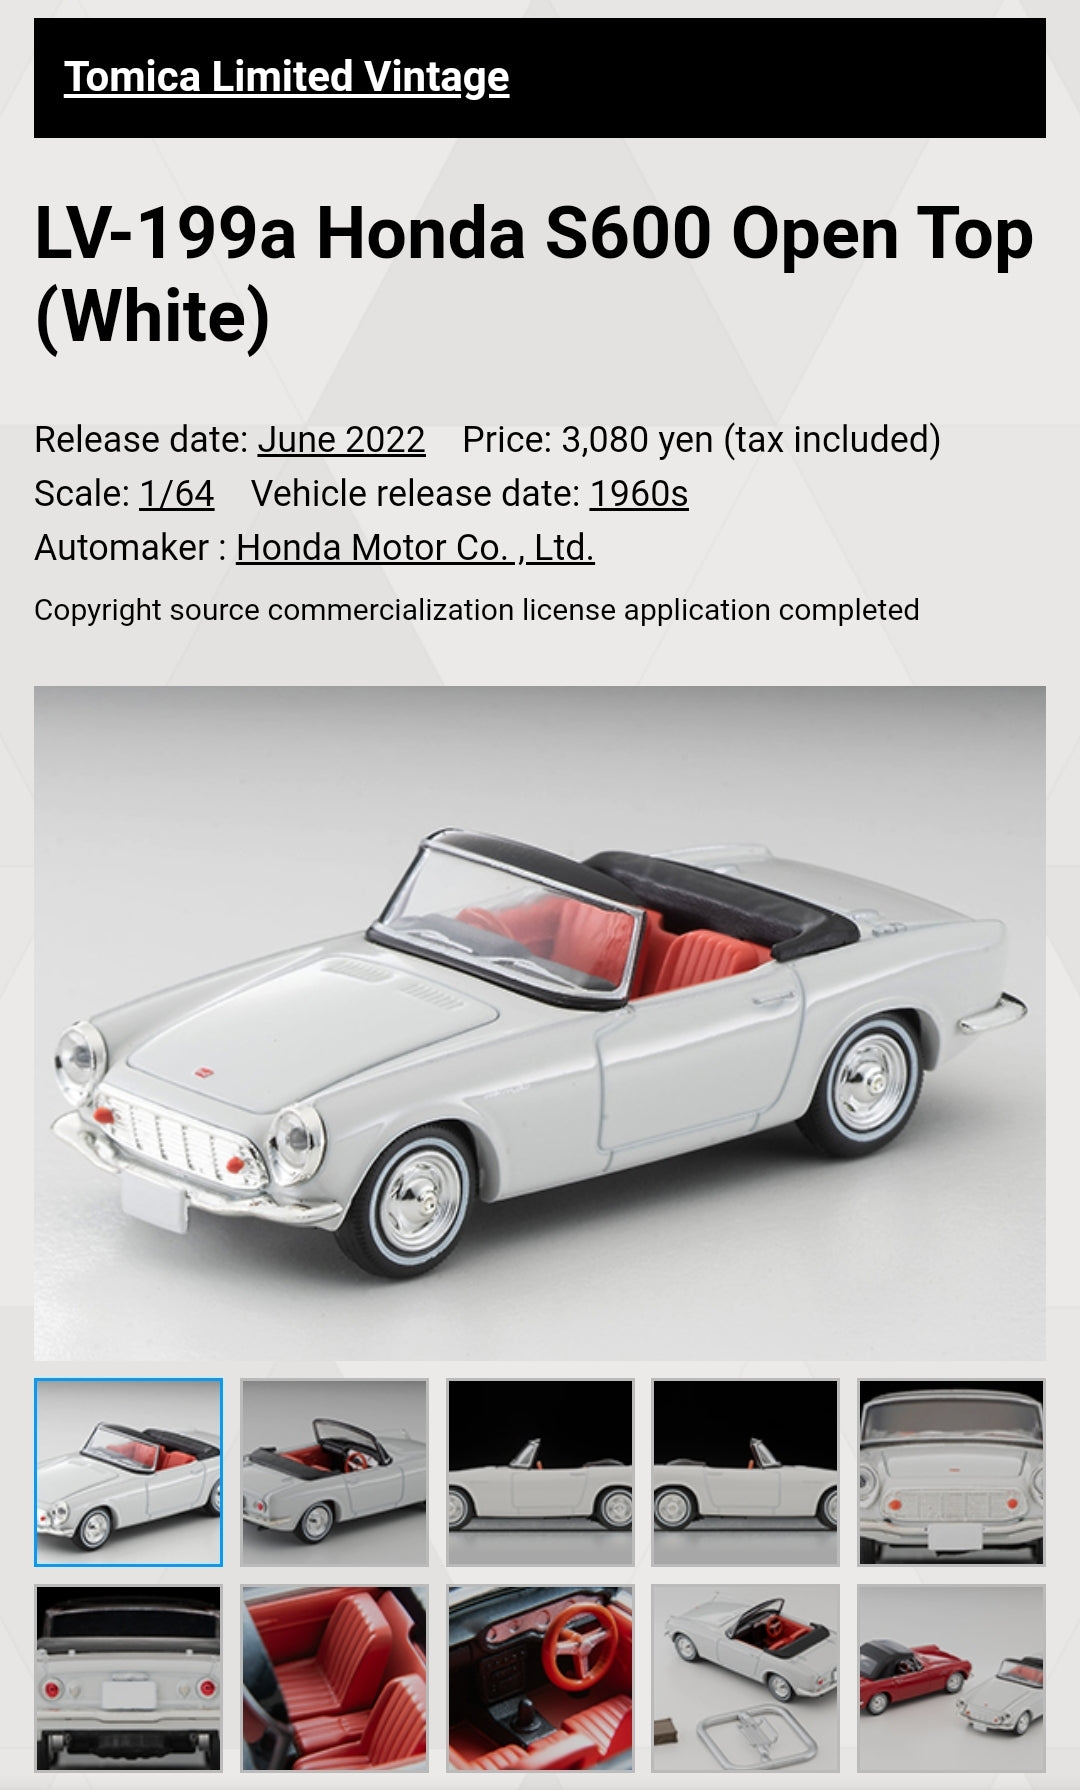 Tomica Limited Vintage LV-199a Honda S600 Open Top (White) Takara Tomy